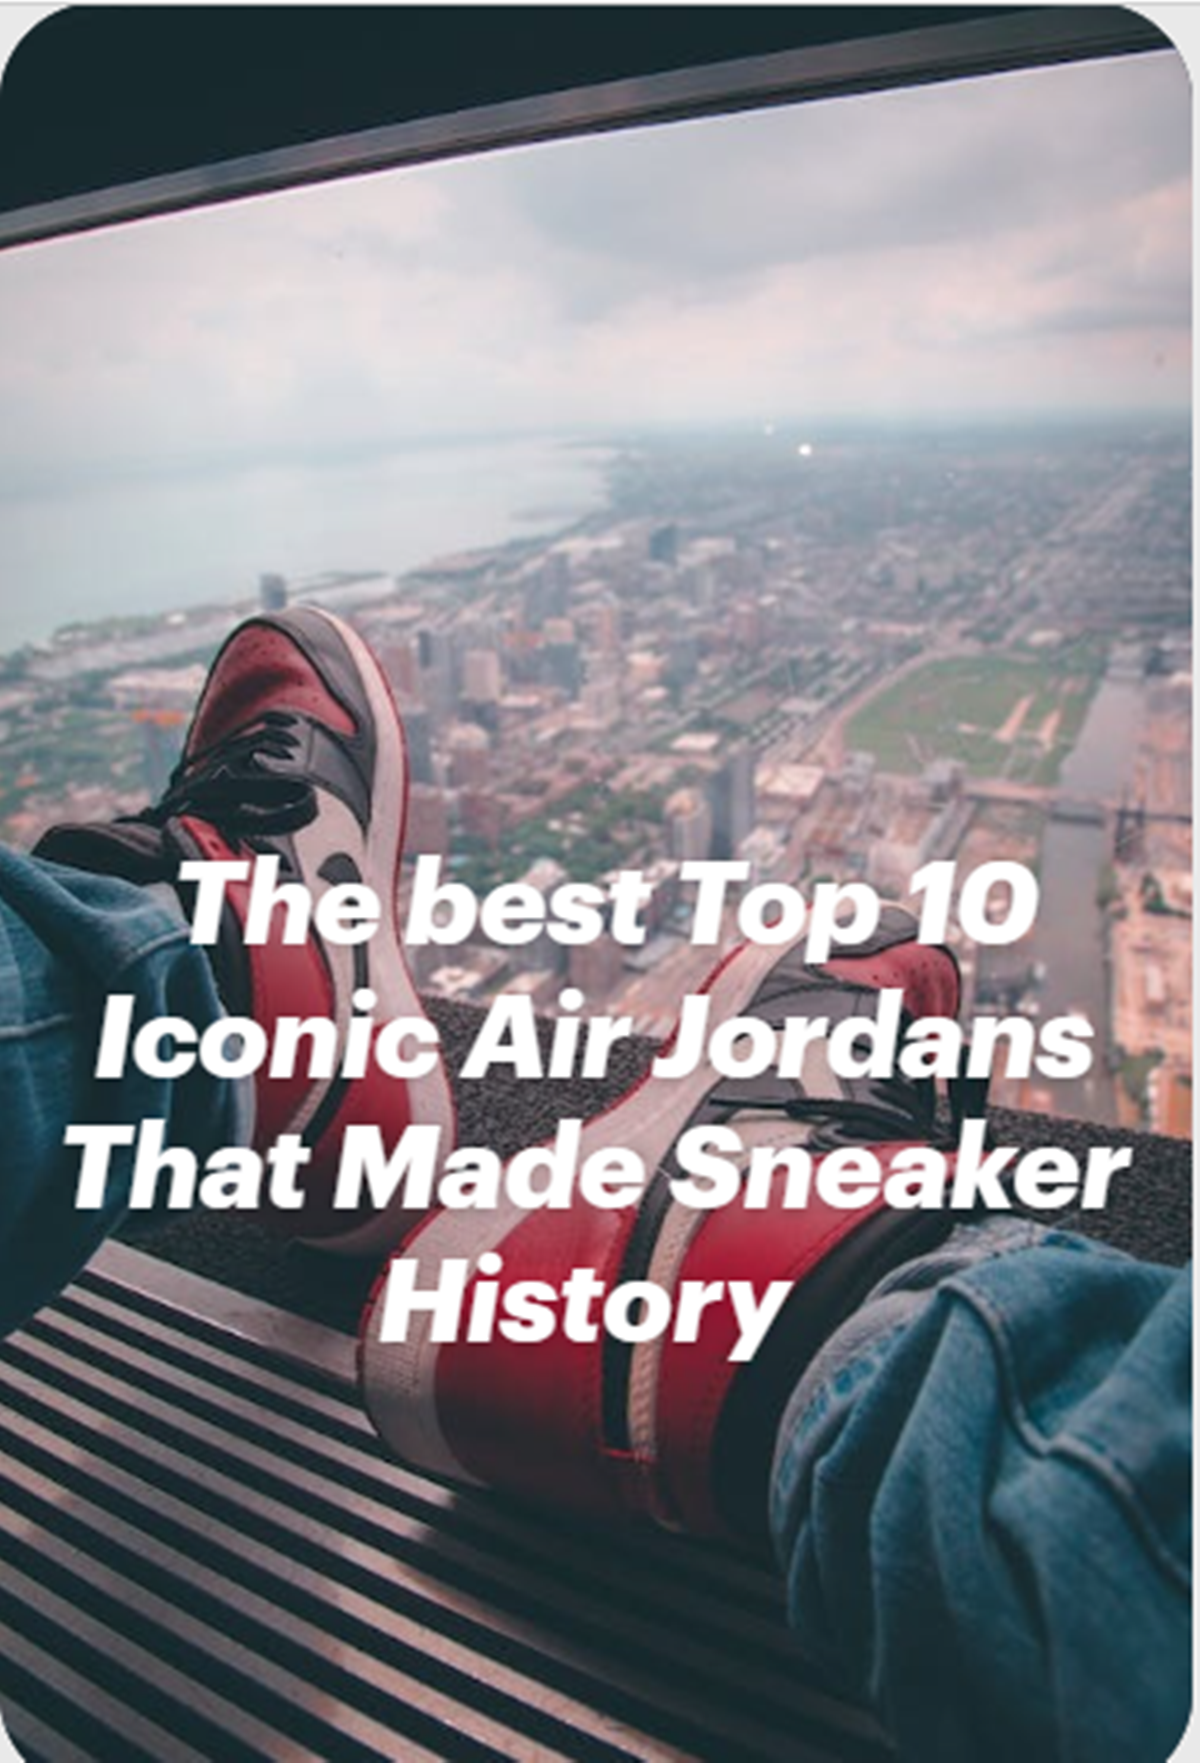 The best Top 10 Iconic Air Jordans That Made Sneaker History